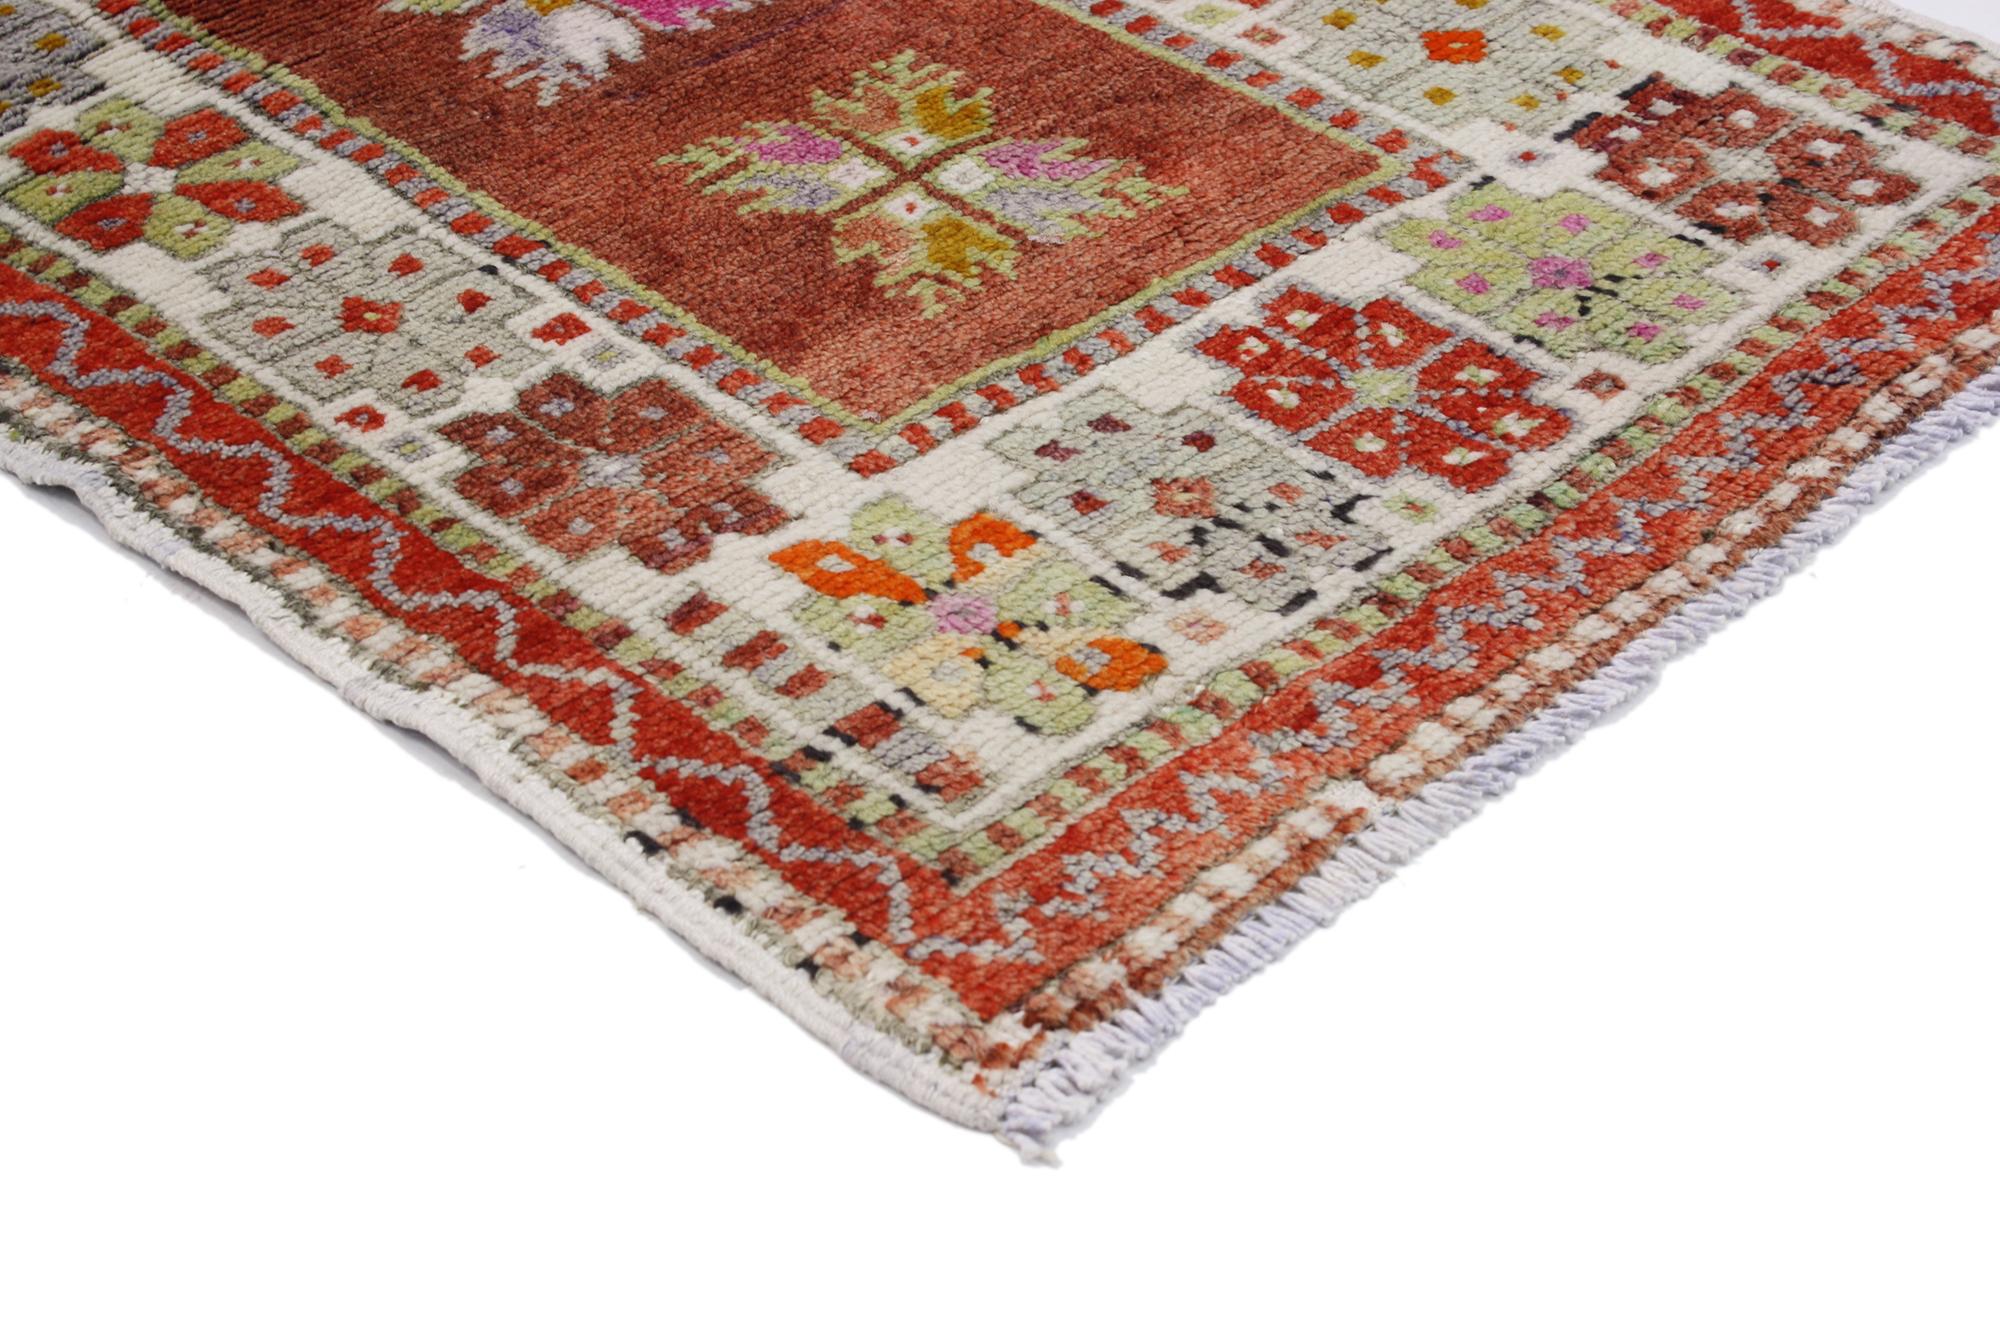 51770, vintage Turkish Oushak Accent rug with color pop, Anatolian Yuntdag rug. This hand knotted wool vintage Turkish Oushak rug features four multi-color quatrefoil florets spread across an abrashed rustic brick red field. The large main border